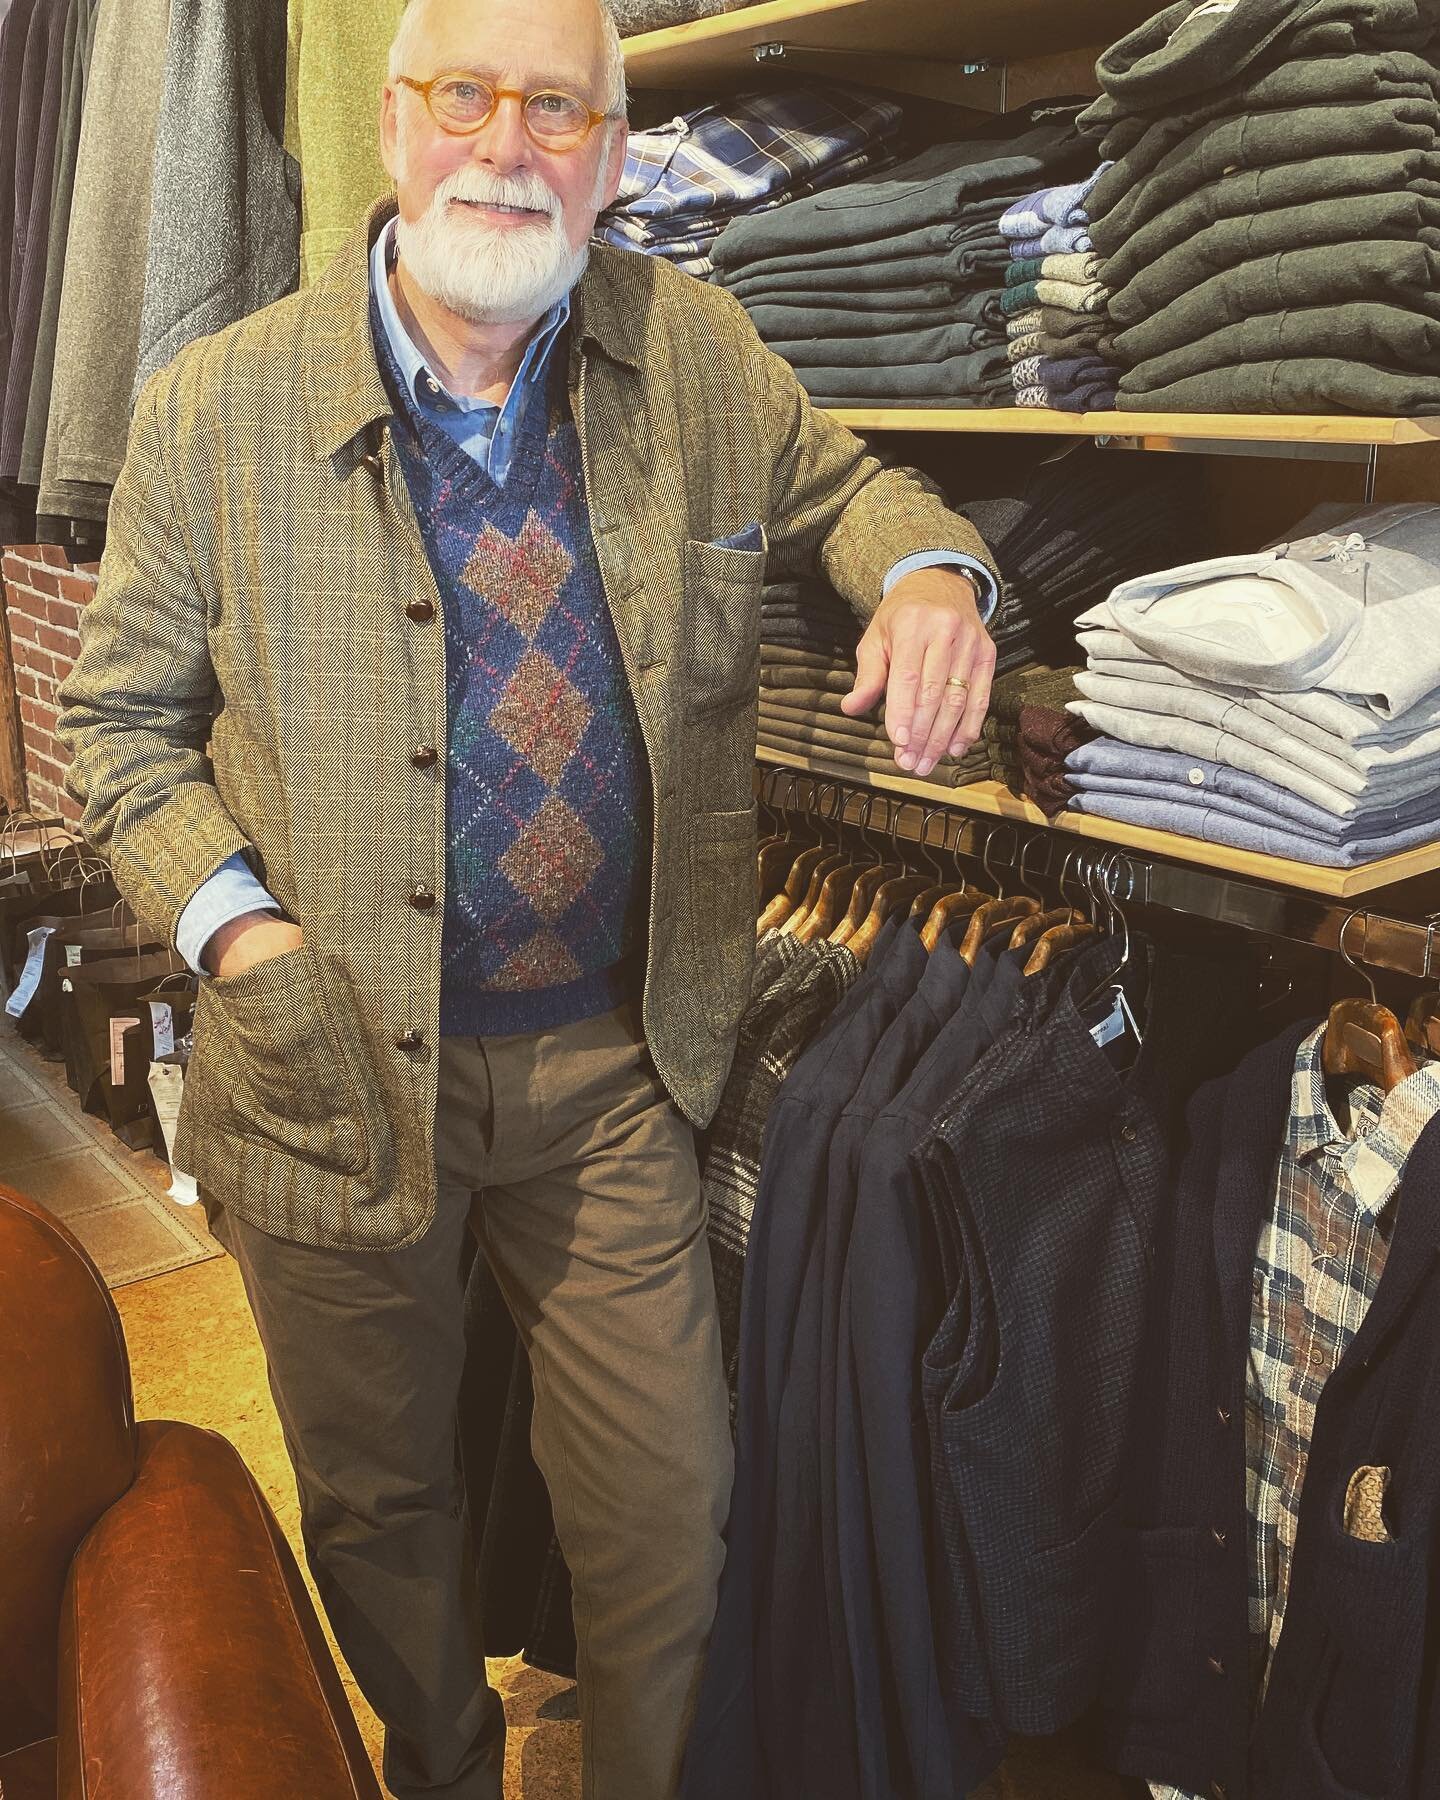 My Sunday Style! All tweed for a brisk, sunny day. Yes, we are open for business. 12 - 6pm. Get a head start on your holiday shopping! @drinkwaterscambridge #greatmensclothing @universal_works @paraboot_official #samplenevermade #alanpainevintage #he